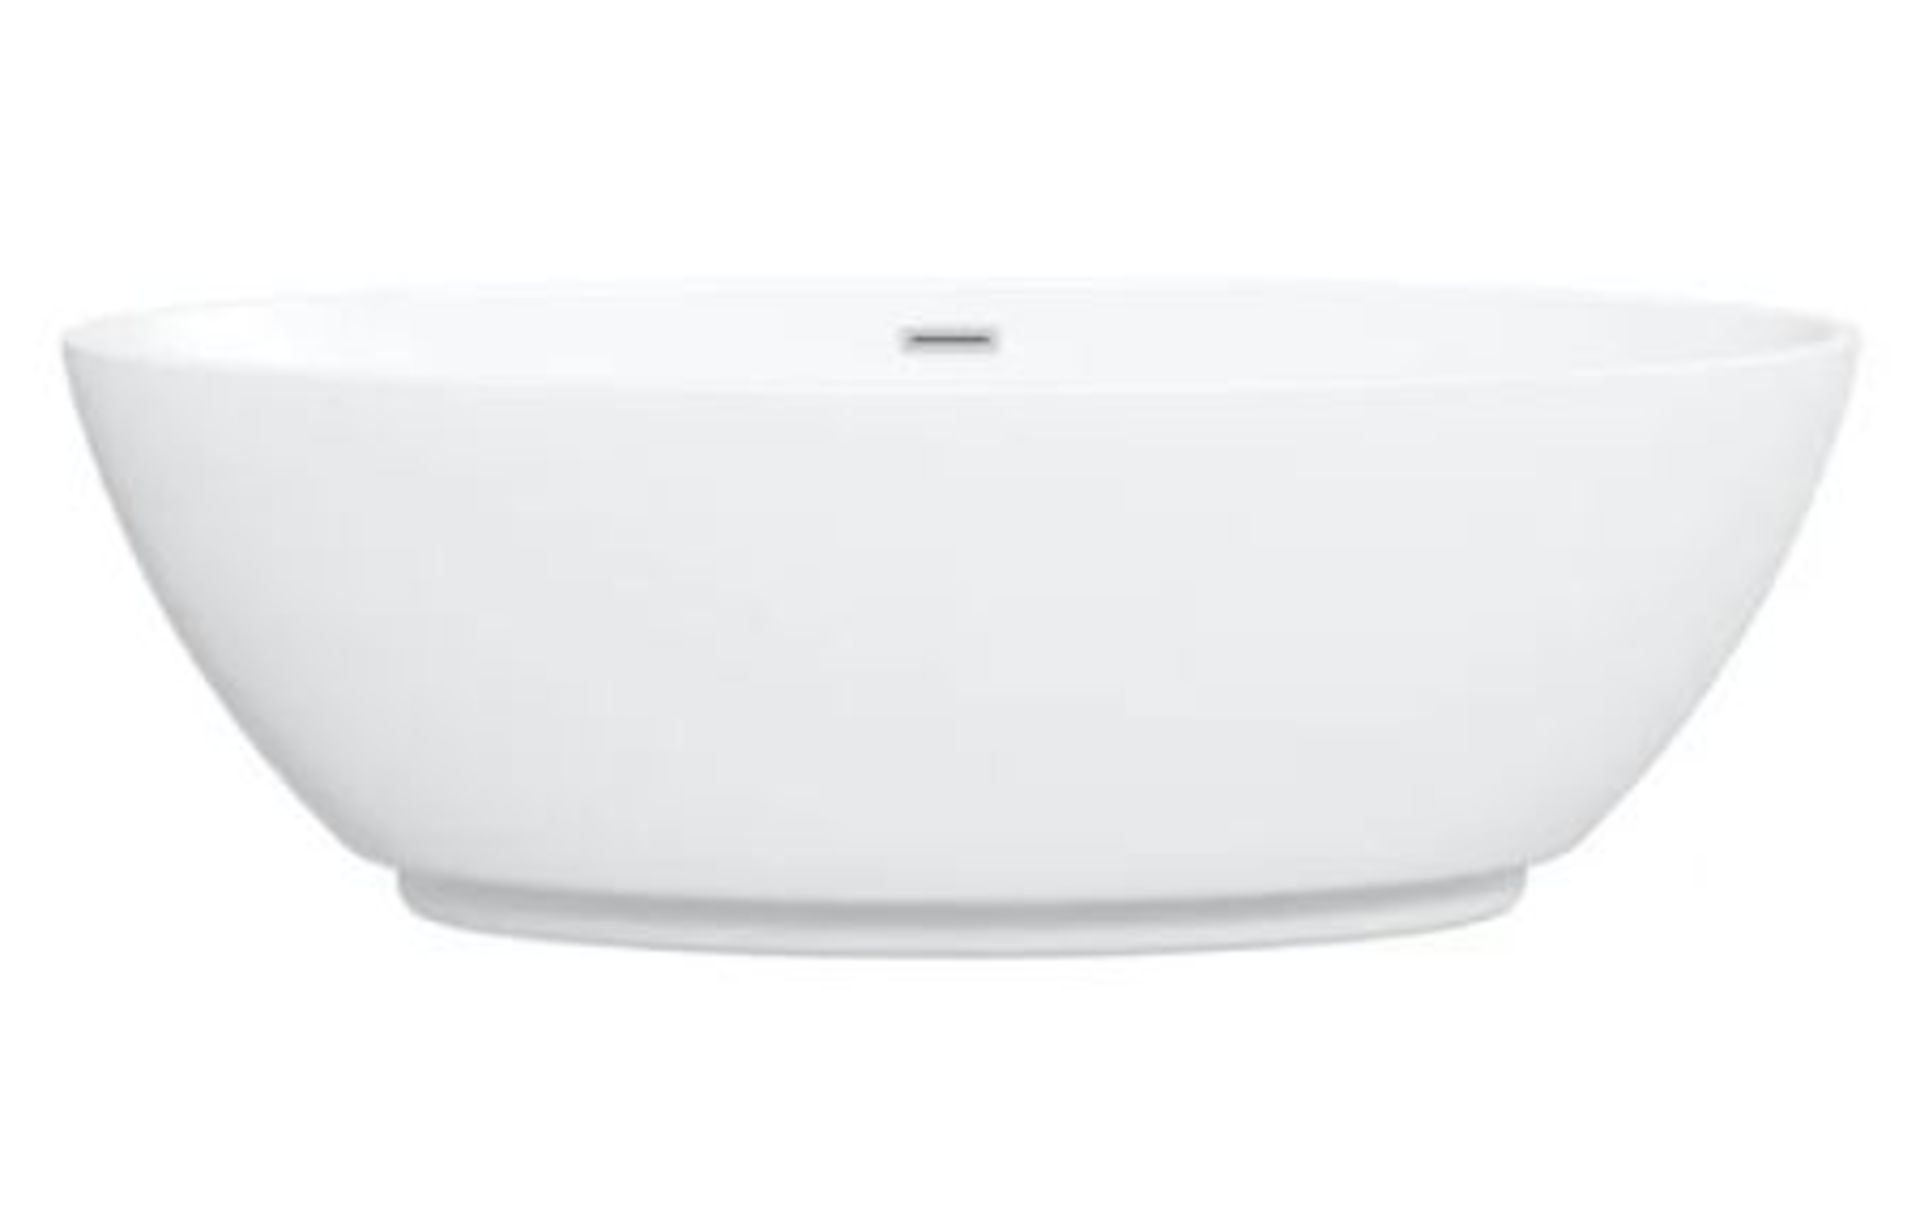 1 X Harrison Freestanding Bath With Waste Mode H600 X W810 X L1790 (rbaif2001) RRP £800 - Image 2 of 7